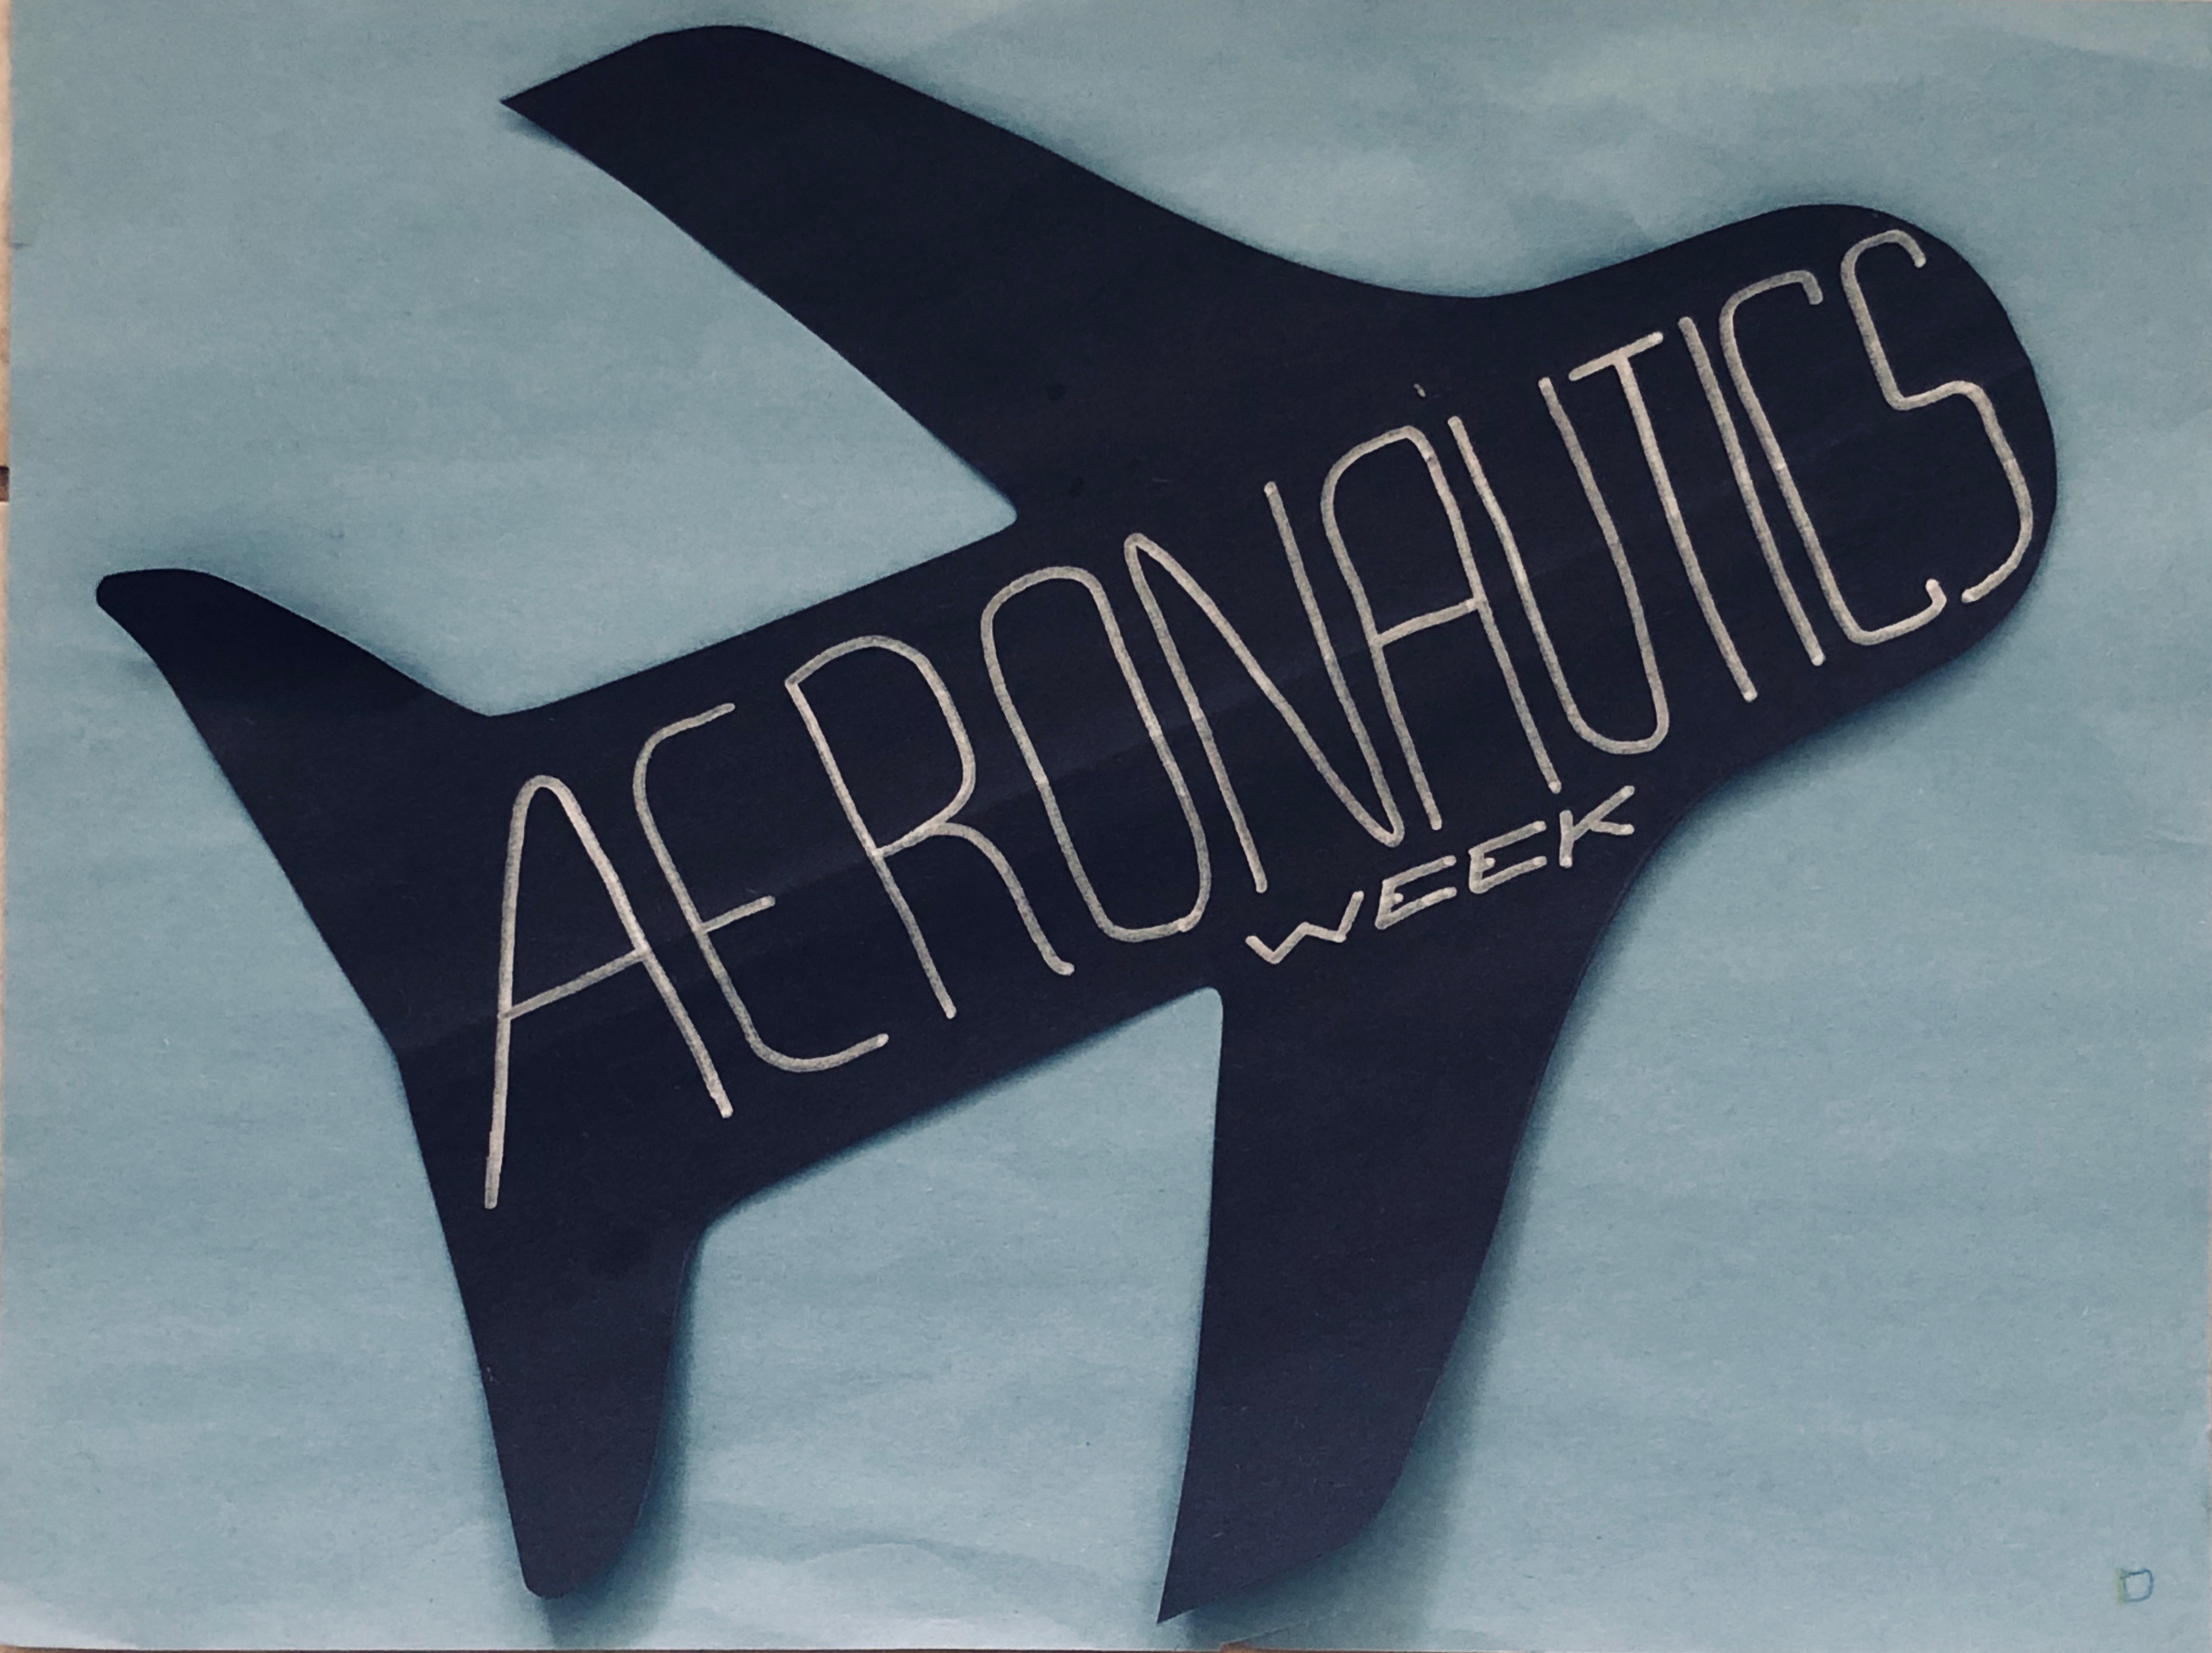 Image of an airplane cut out of black construction paper with the words Aeronautics Week written in silver sharpie